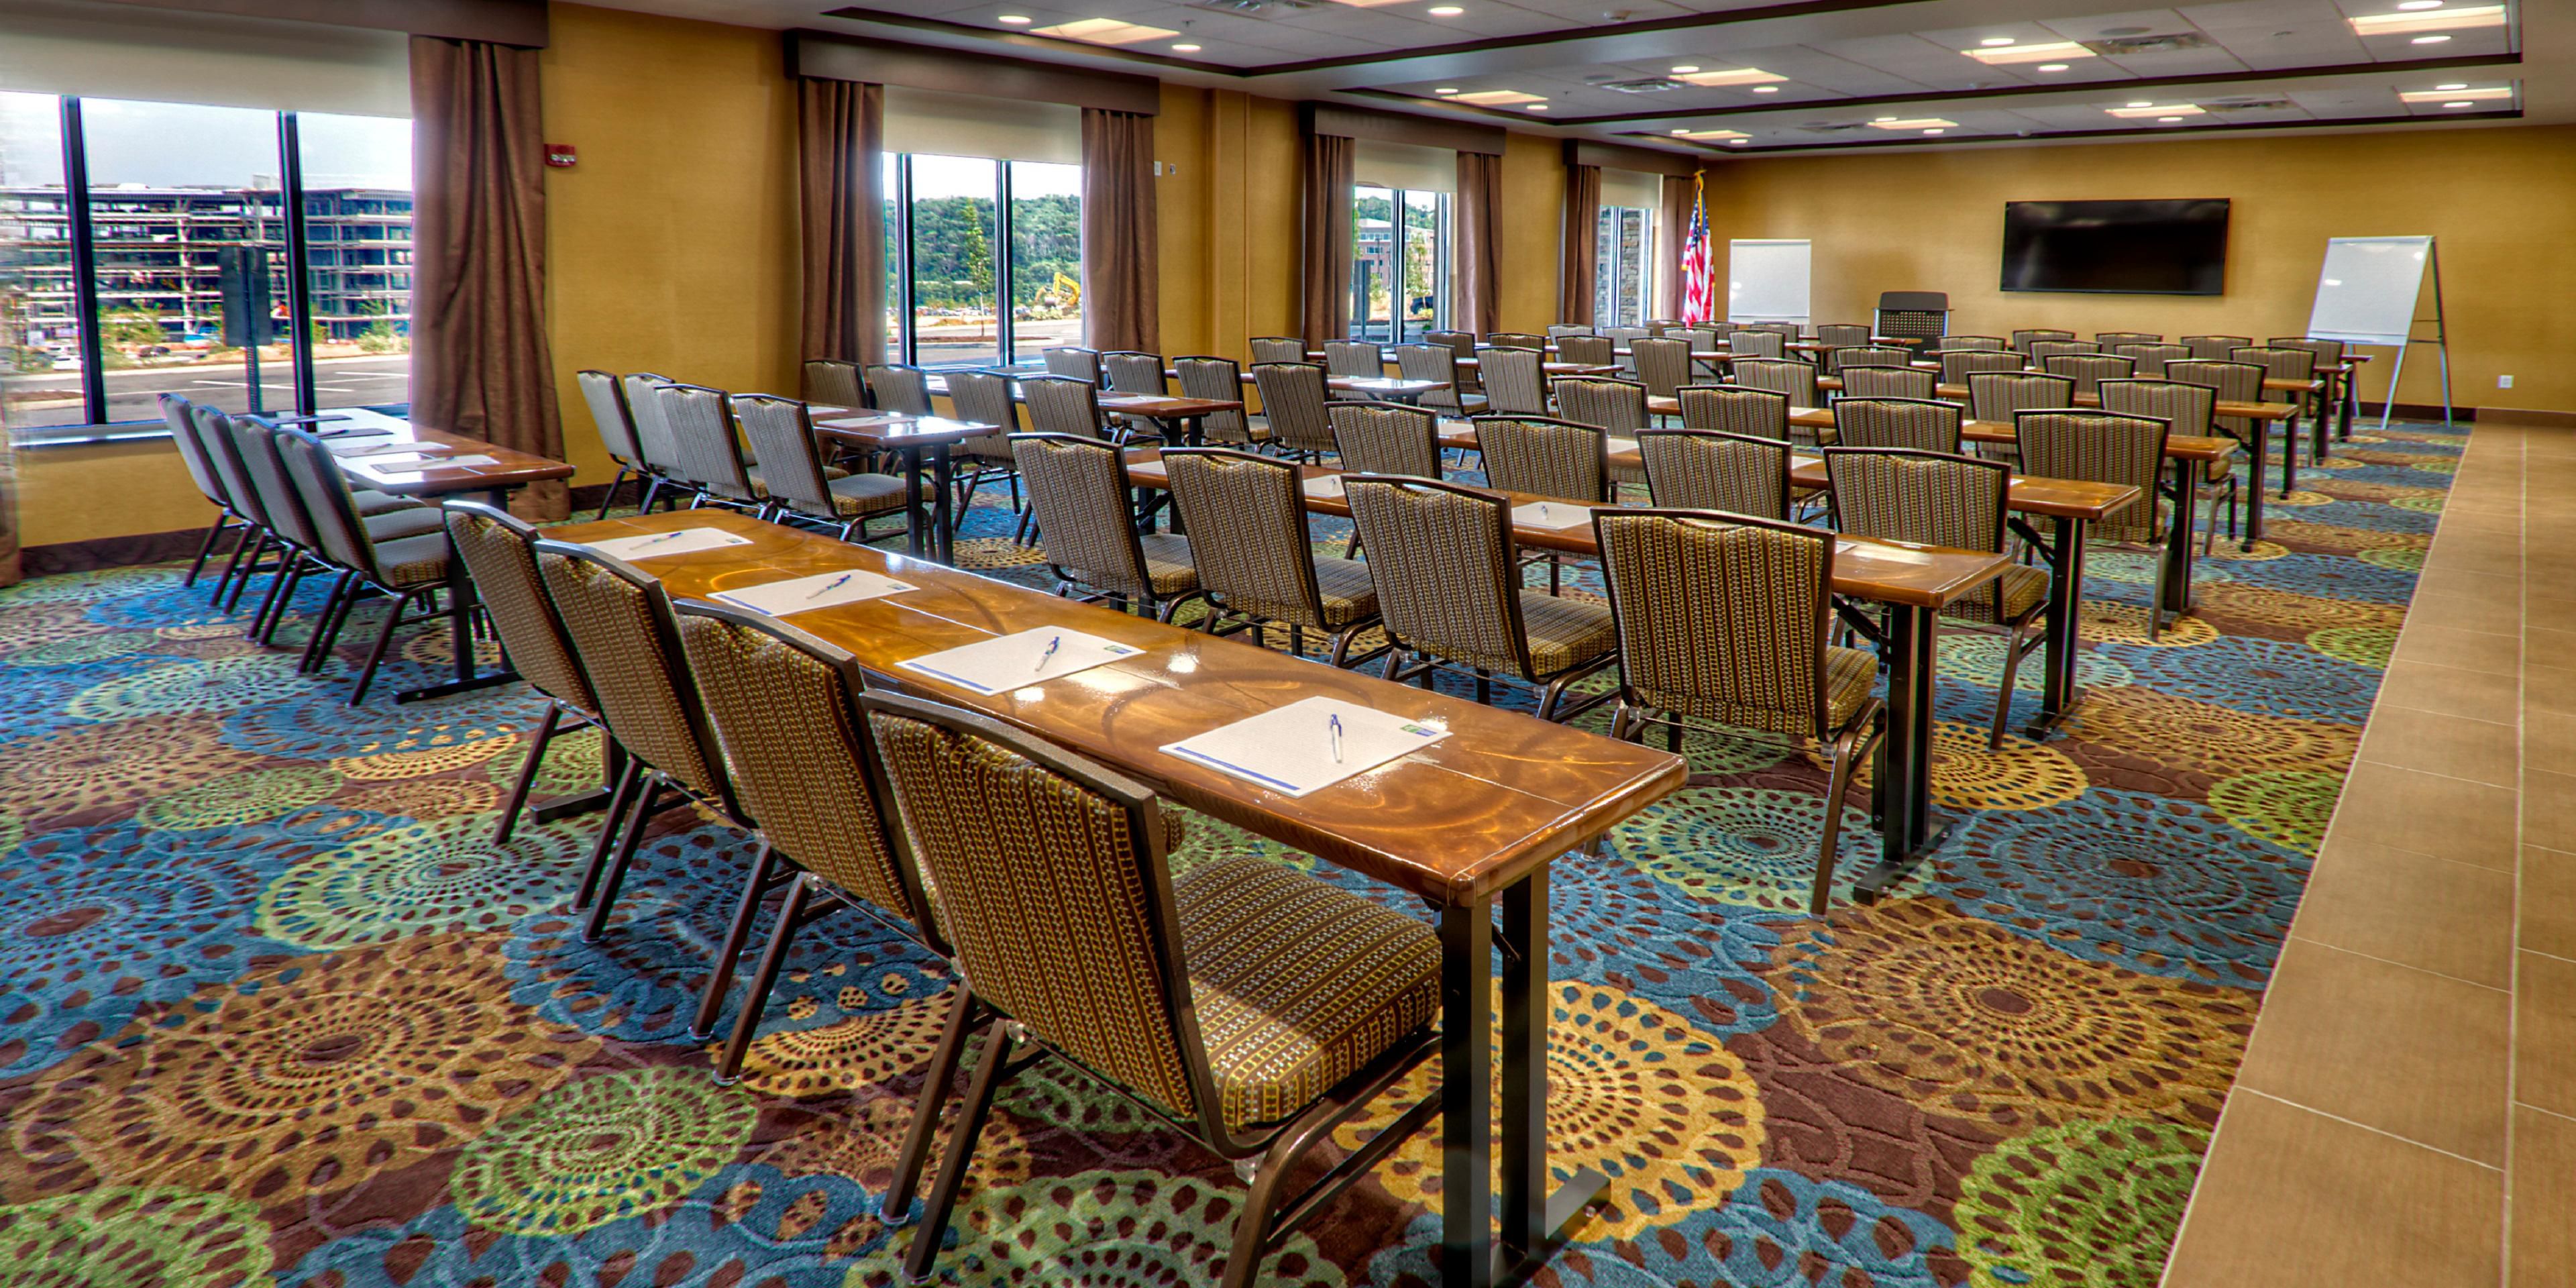 The Holiday Inn Express & Suites is conveniently located in the Southpointe Business Park and perfect for corporate meetings to social events ranging up to about 80 people. Catering services available.